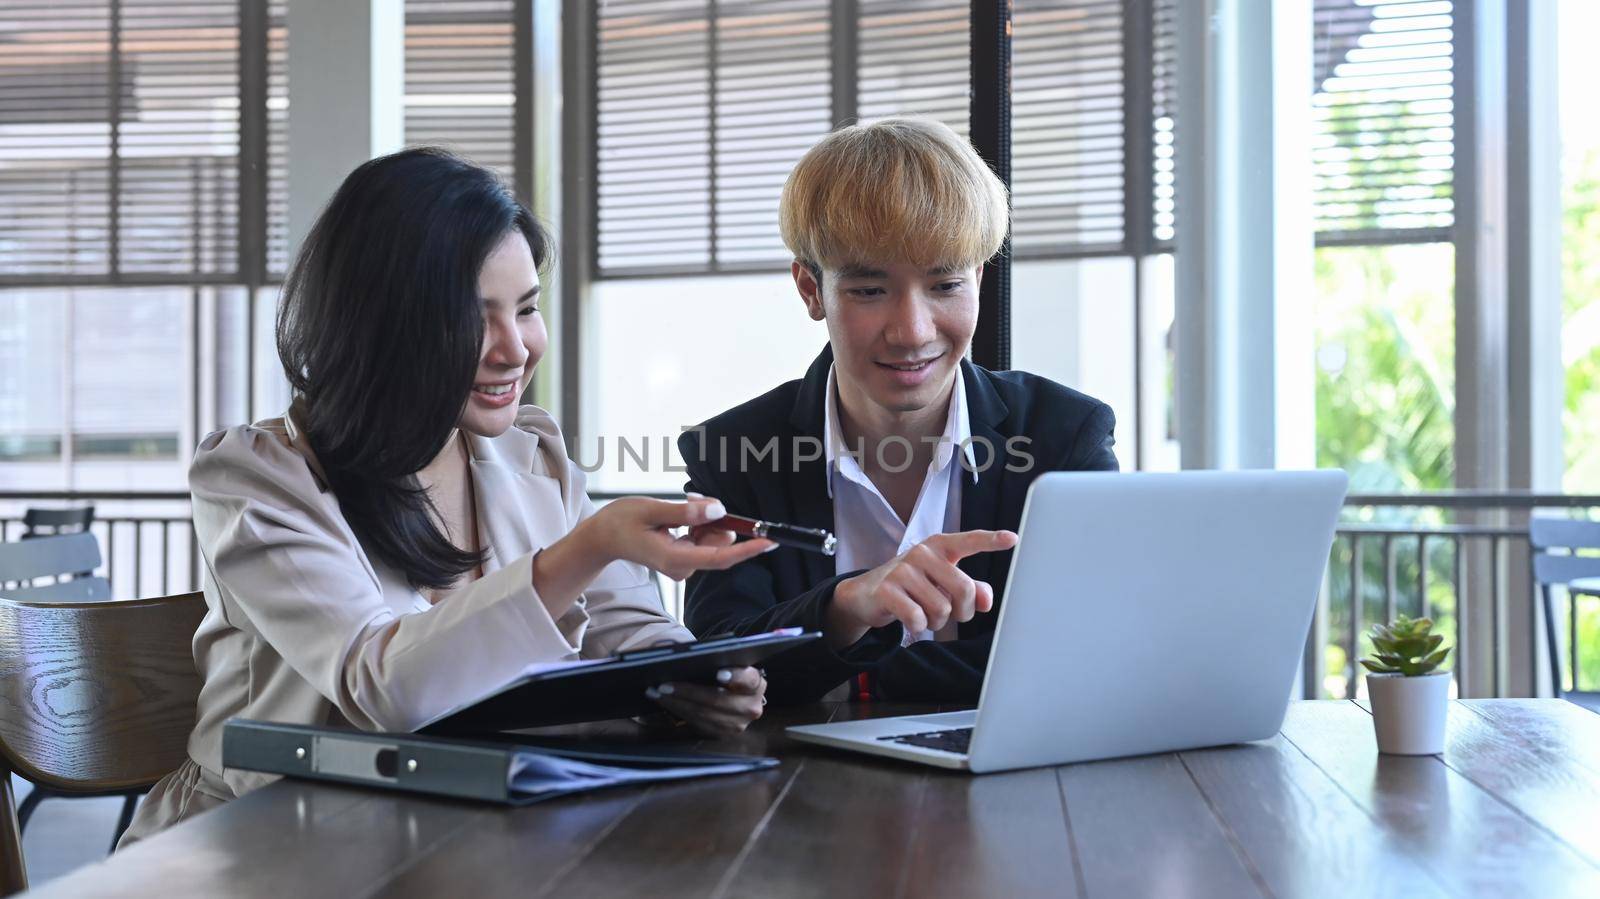 Two young businesspeople using computer laptop and discussing on new startup project together.